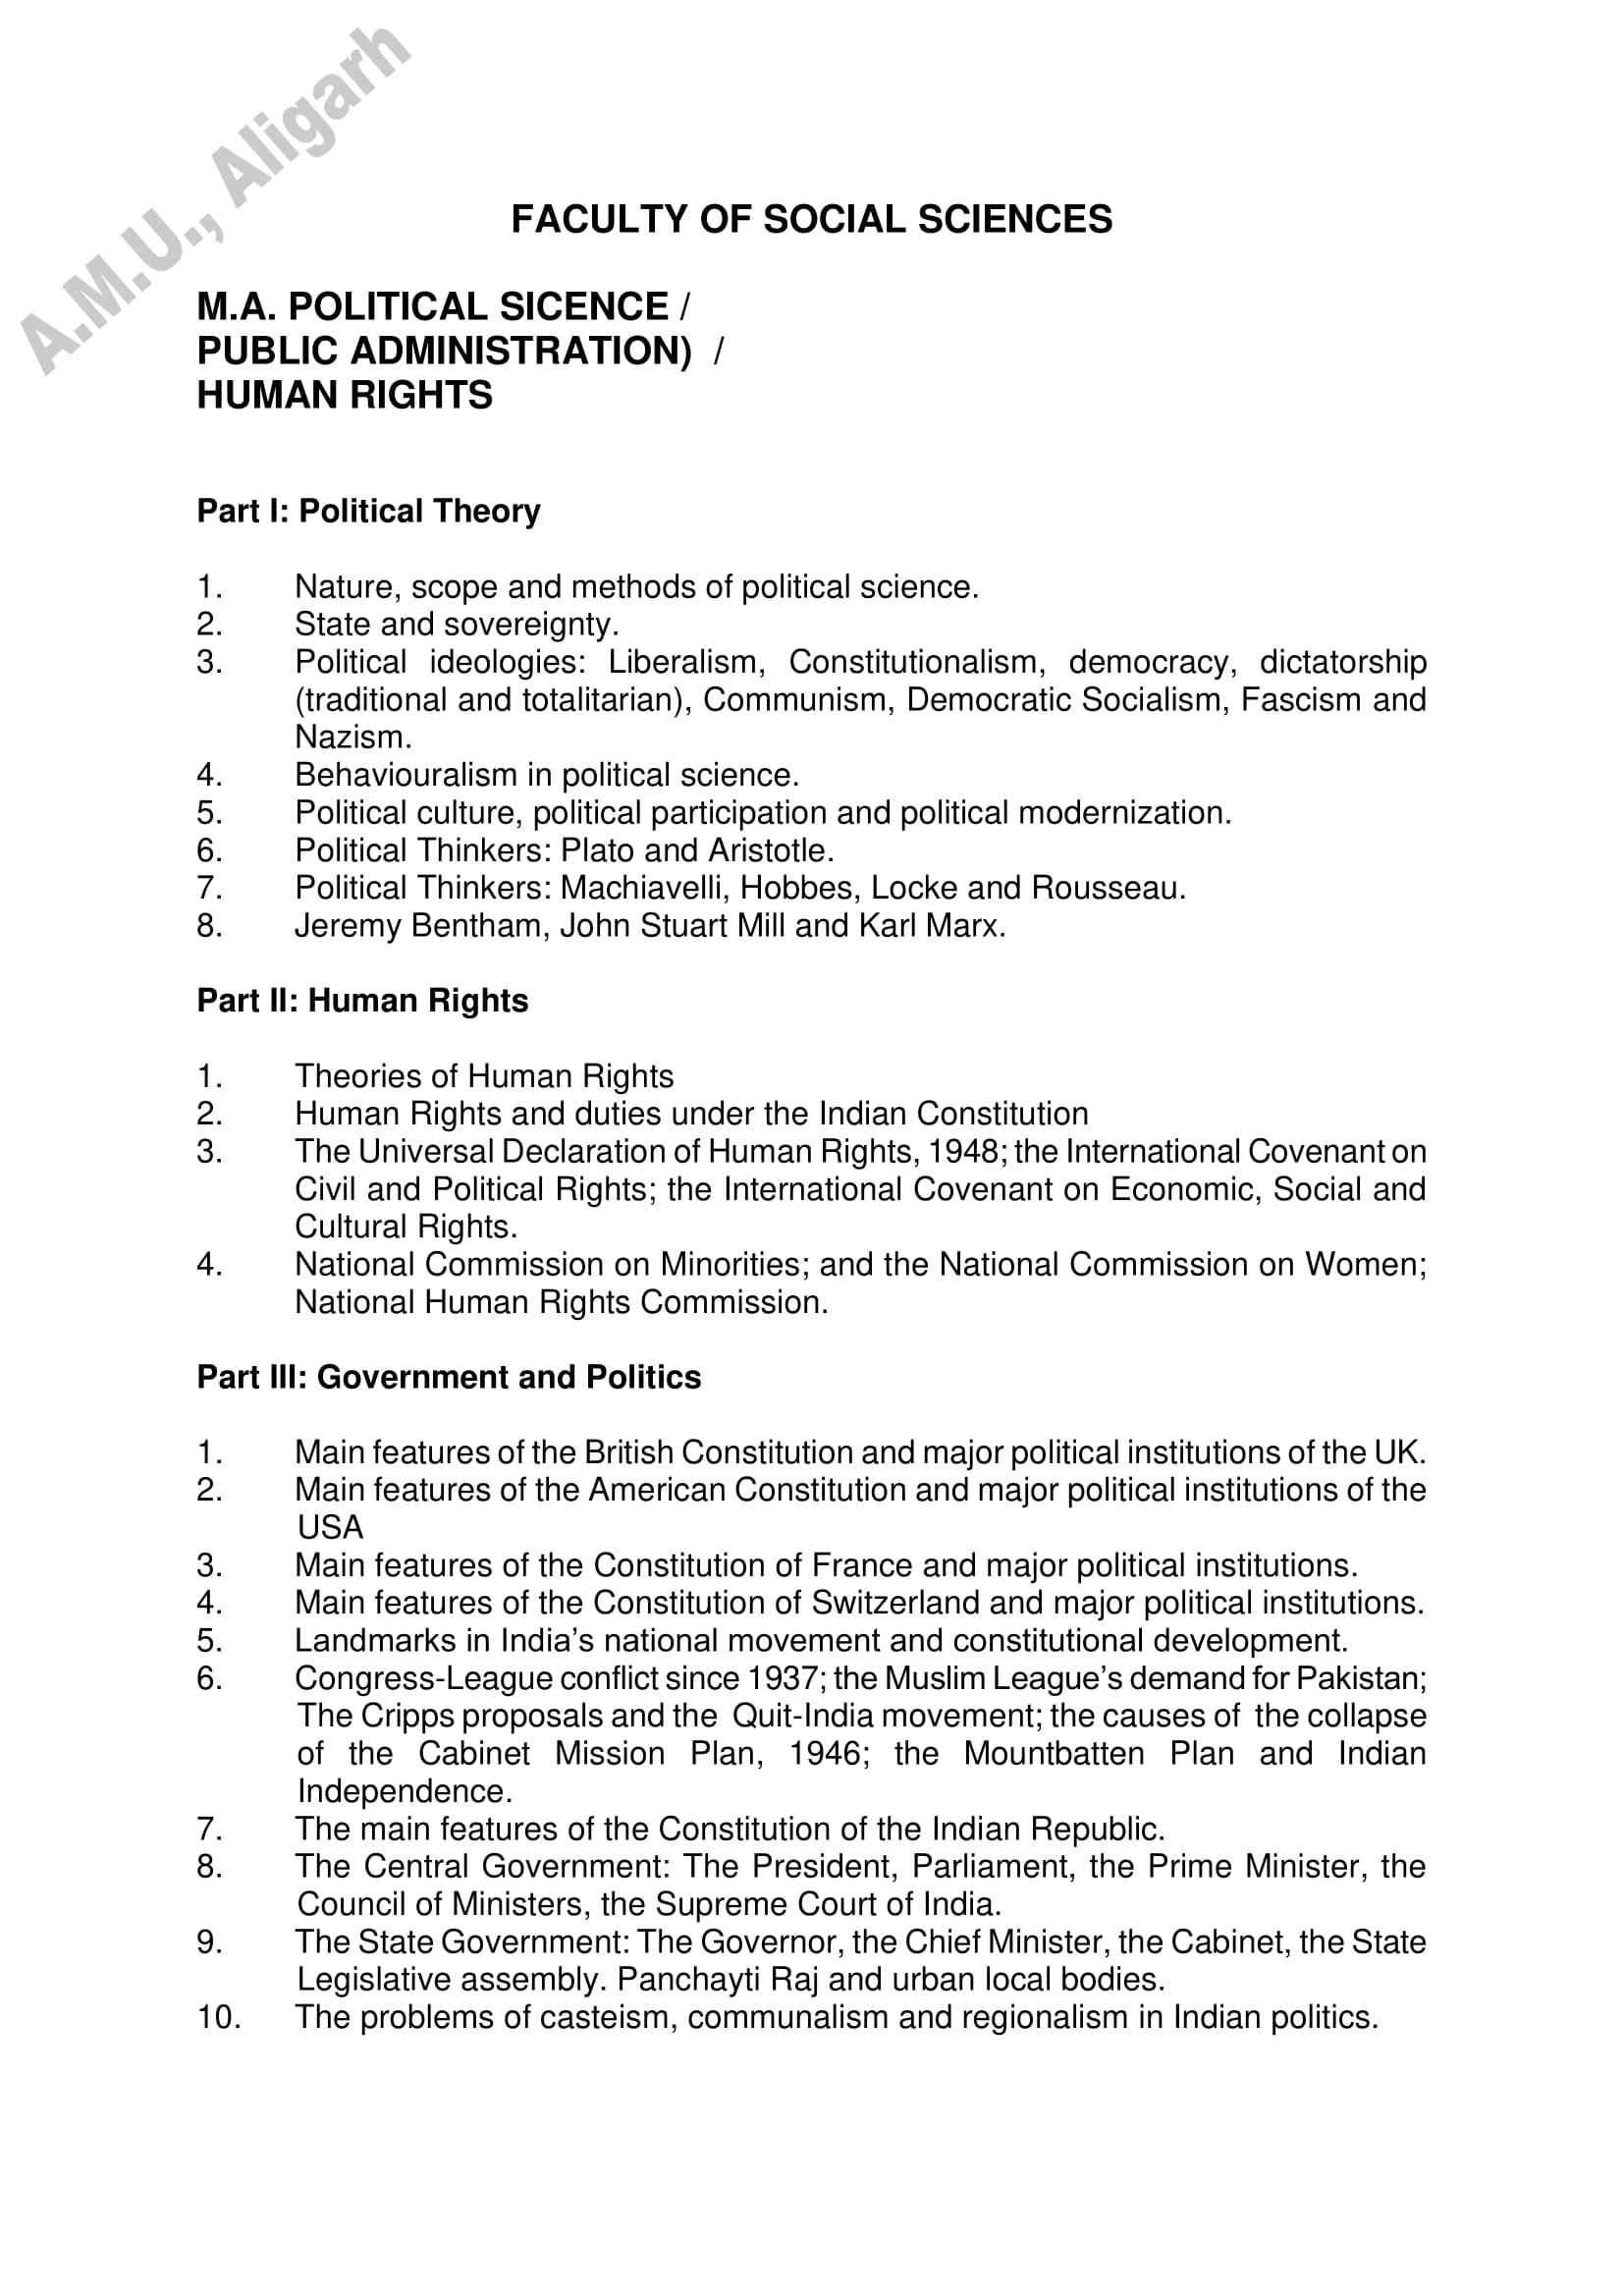 AMU Entrance Exam Syllabus for M.A. in Political Science, Public Administration and Human Rights - Page 1